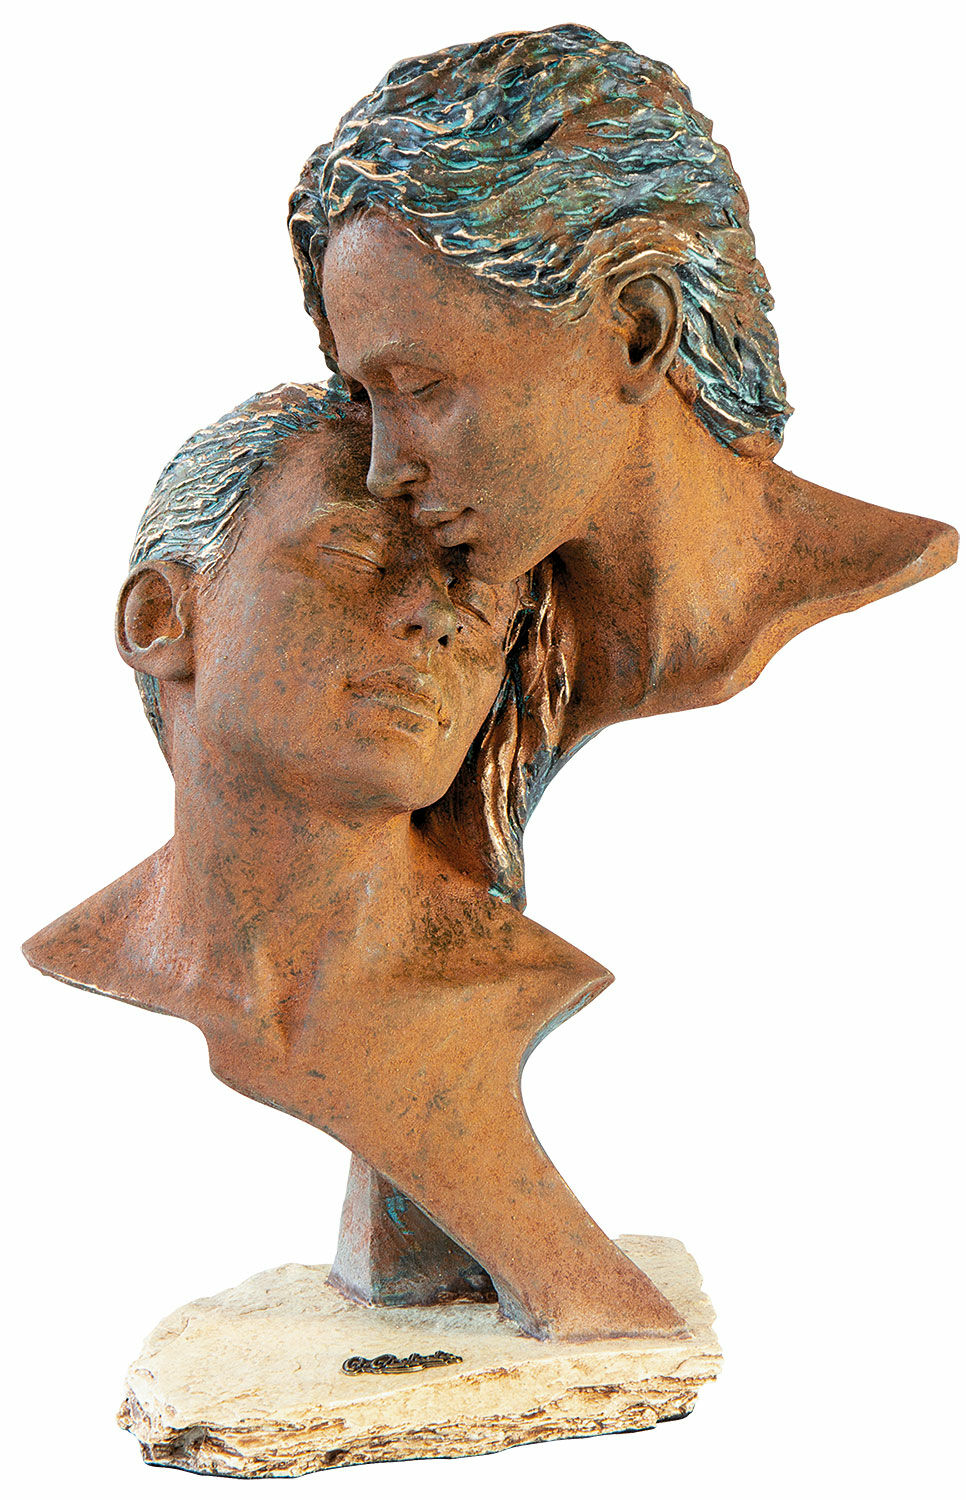 Sculpture "Quality Time Together", artificial stone by Angeles Anglada